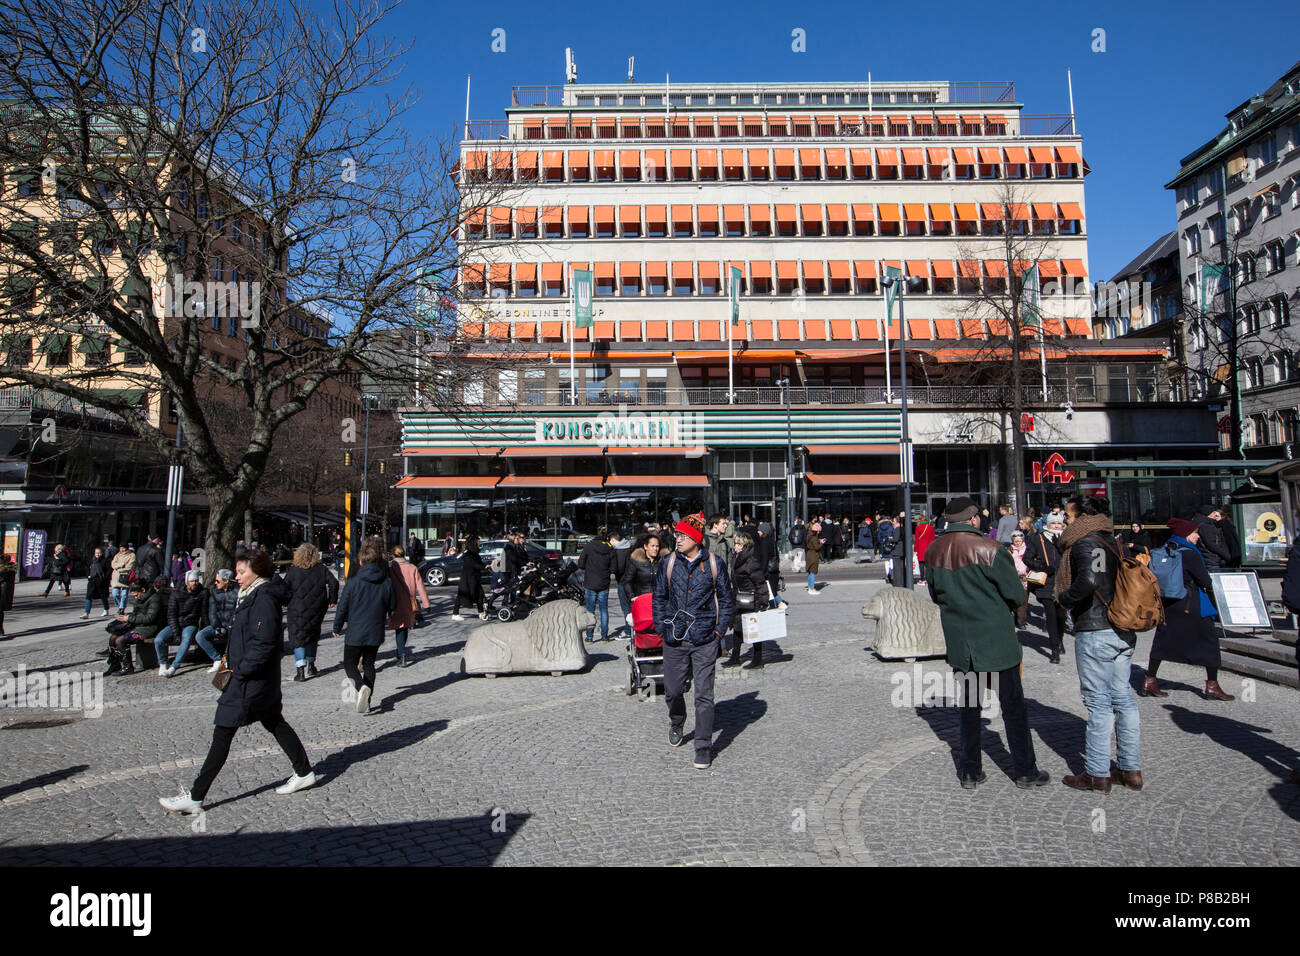 Hötorget Sergel Ur, city square in the center of Stockholm, surrounded by Kungshallen food court, Hötorgshallen food market and Royal Concert Halls. Stock Photo